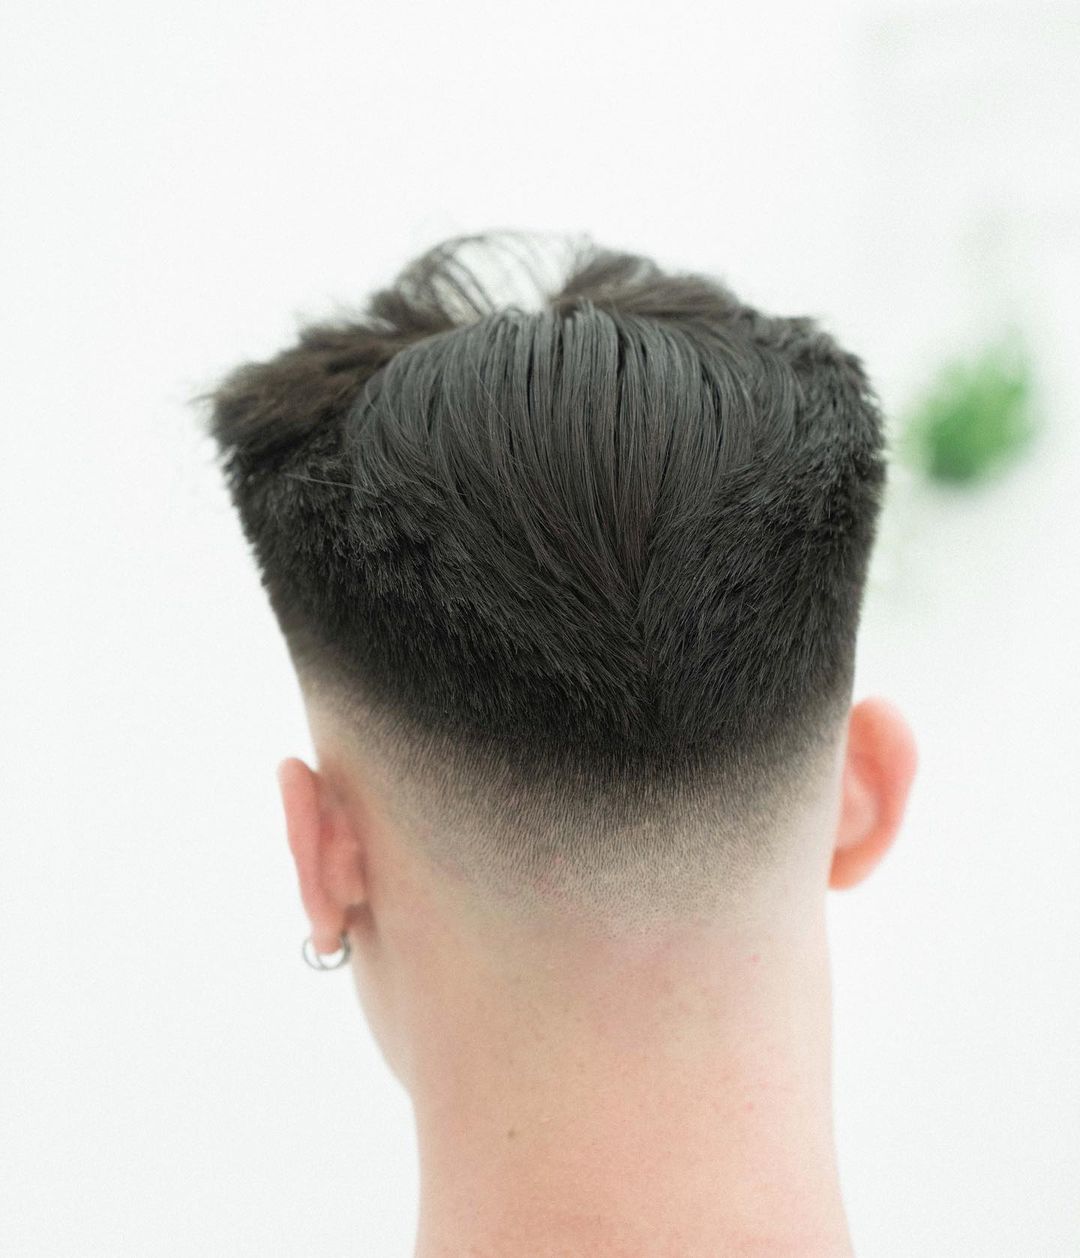 13 Trendy Burst Fade Haircut Styles You Should Try in 2023